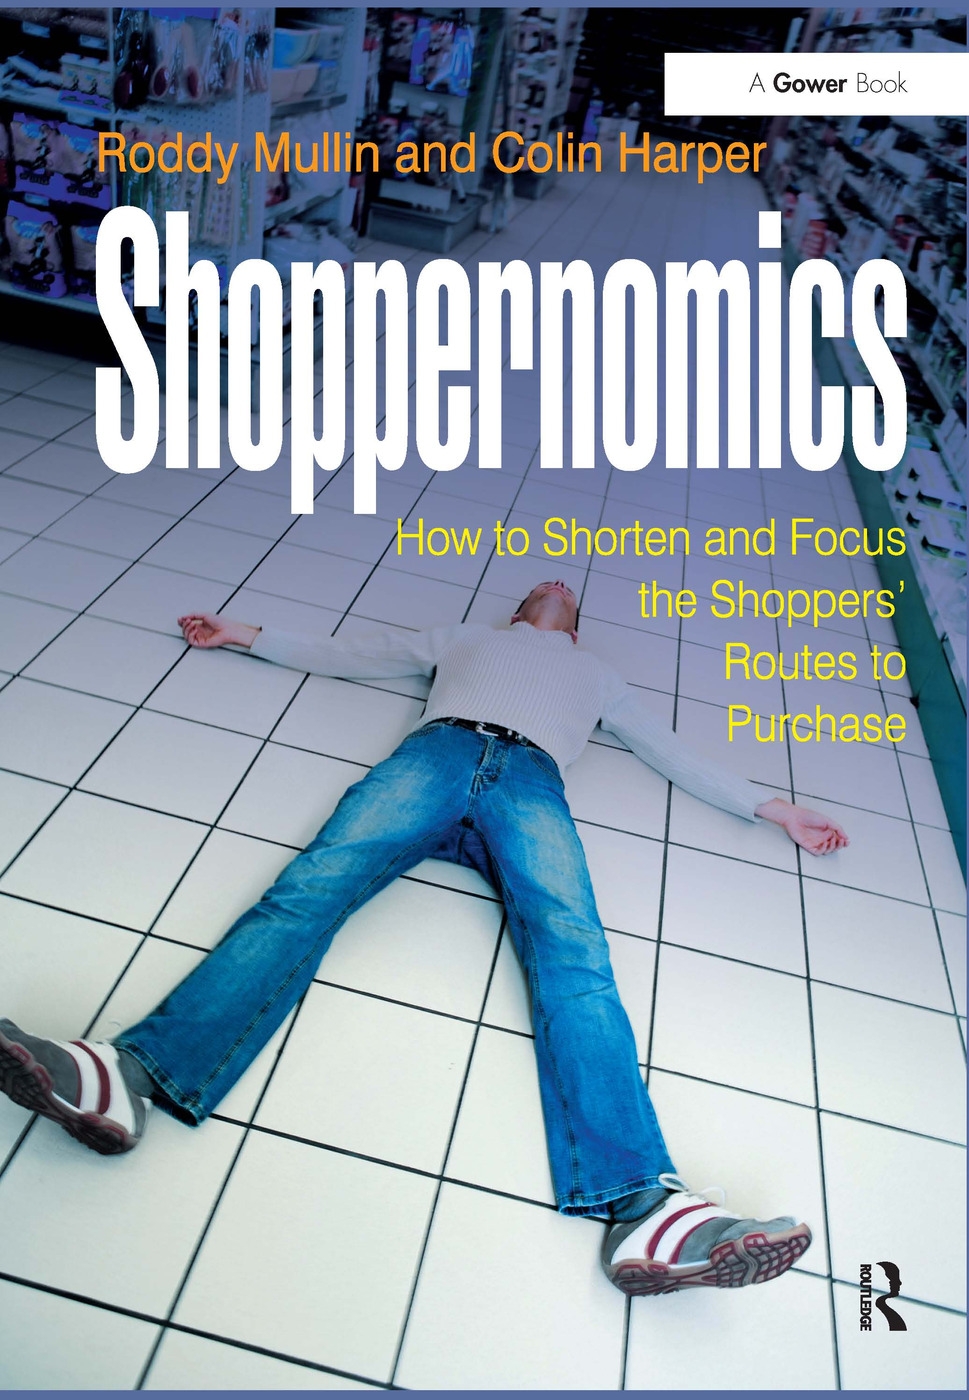 Shoppernomics: How to Shorten and Focus the Shoppers’ Routes to Purchase